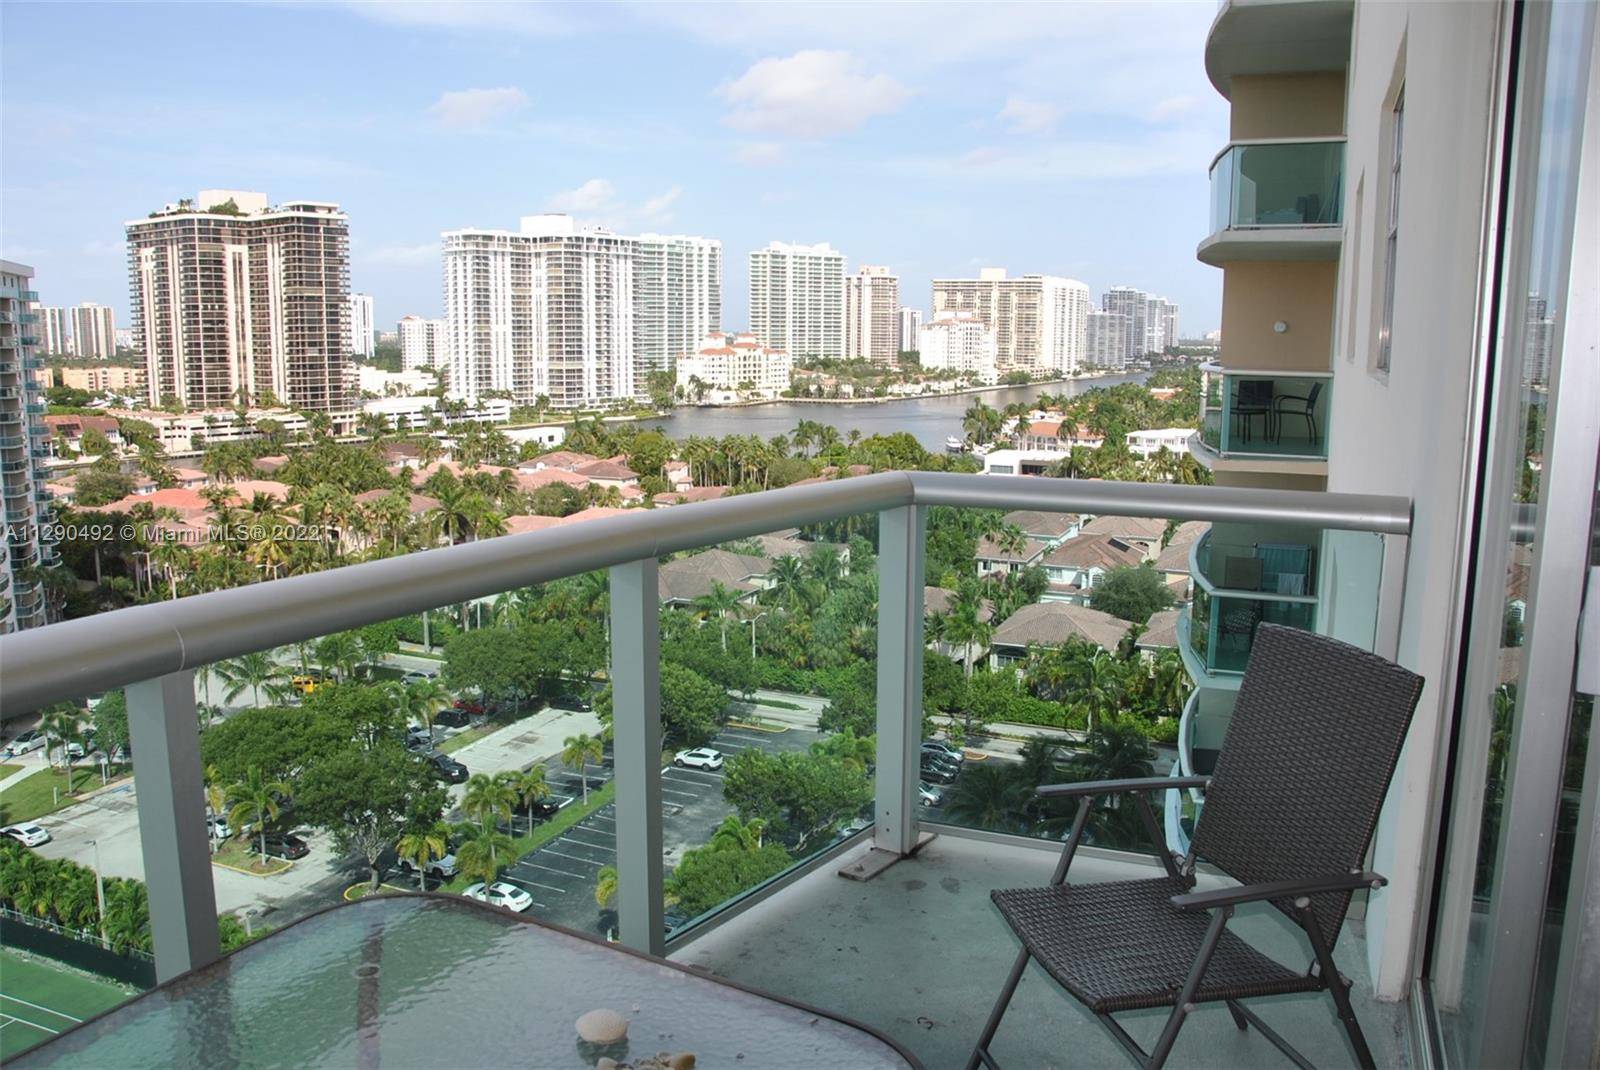 Spectacular 2 beds 2baths apartment, located in a resort style condo, fully furniture, ready to live, with top of the line amenities, such a tennis courts, heated pool, kids playground ...